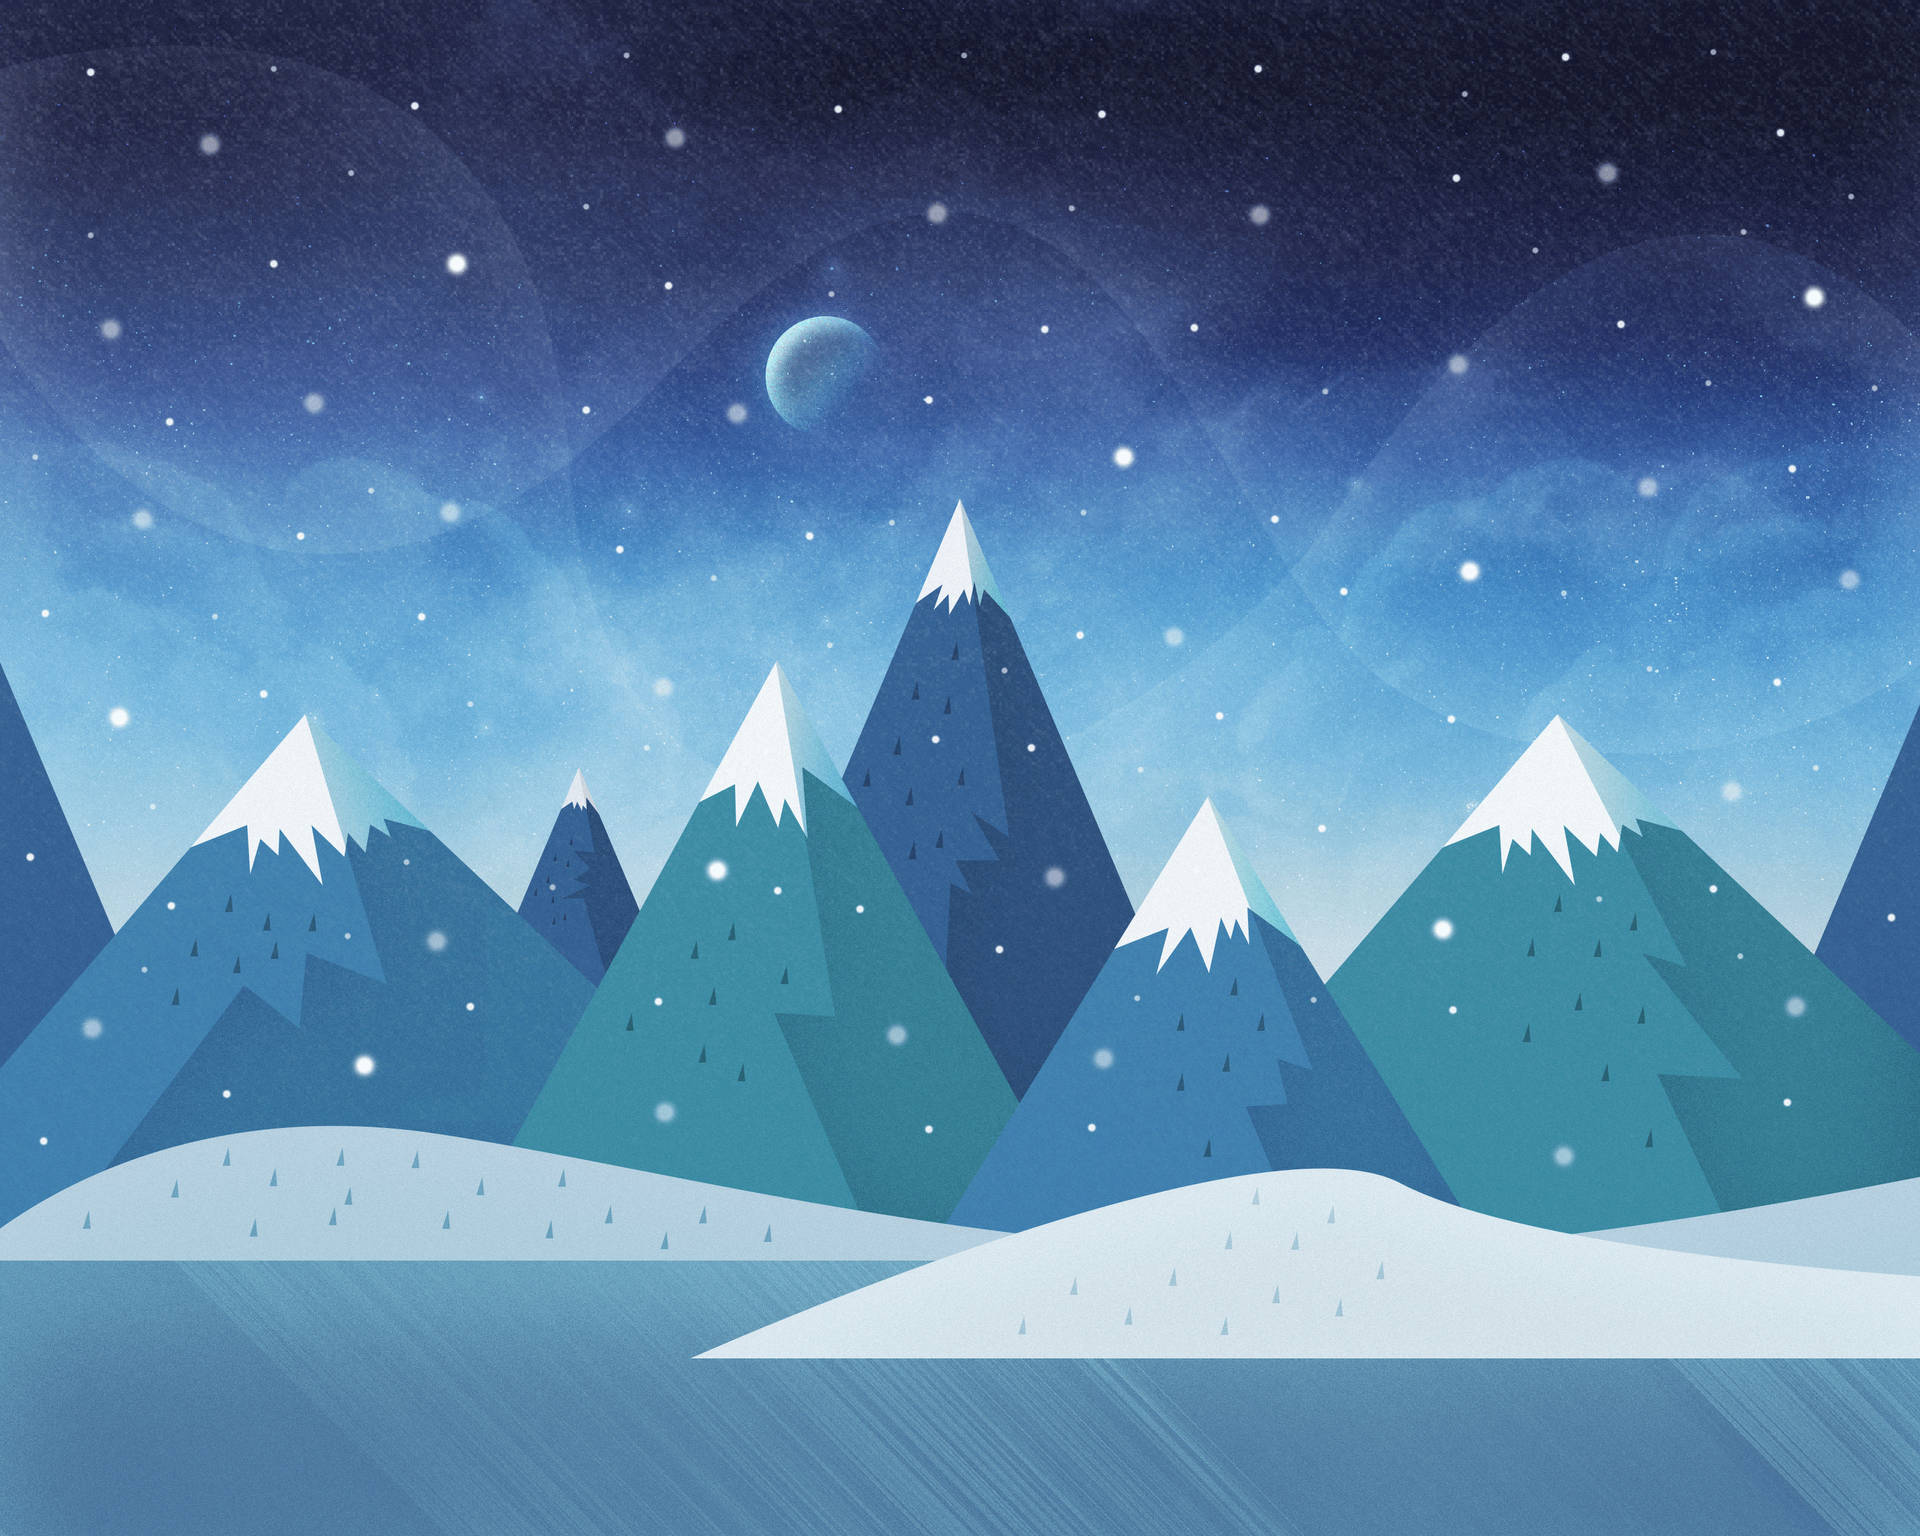 Winter Wonderland - Enjoy the beauty of a chilly winter holiday Wallpaper